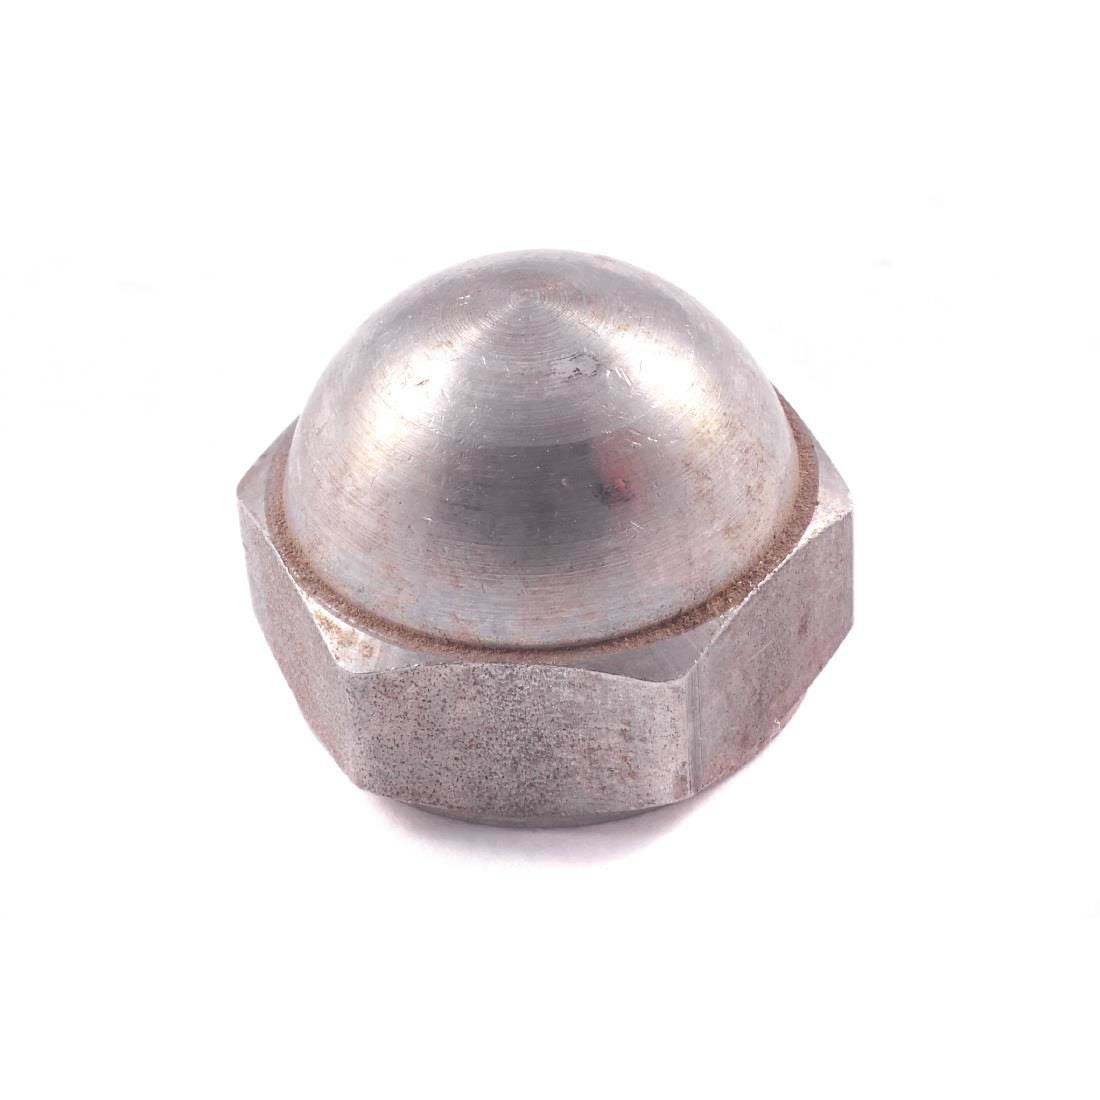 WA015 Waring Cap Nut for Blending Assembly